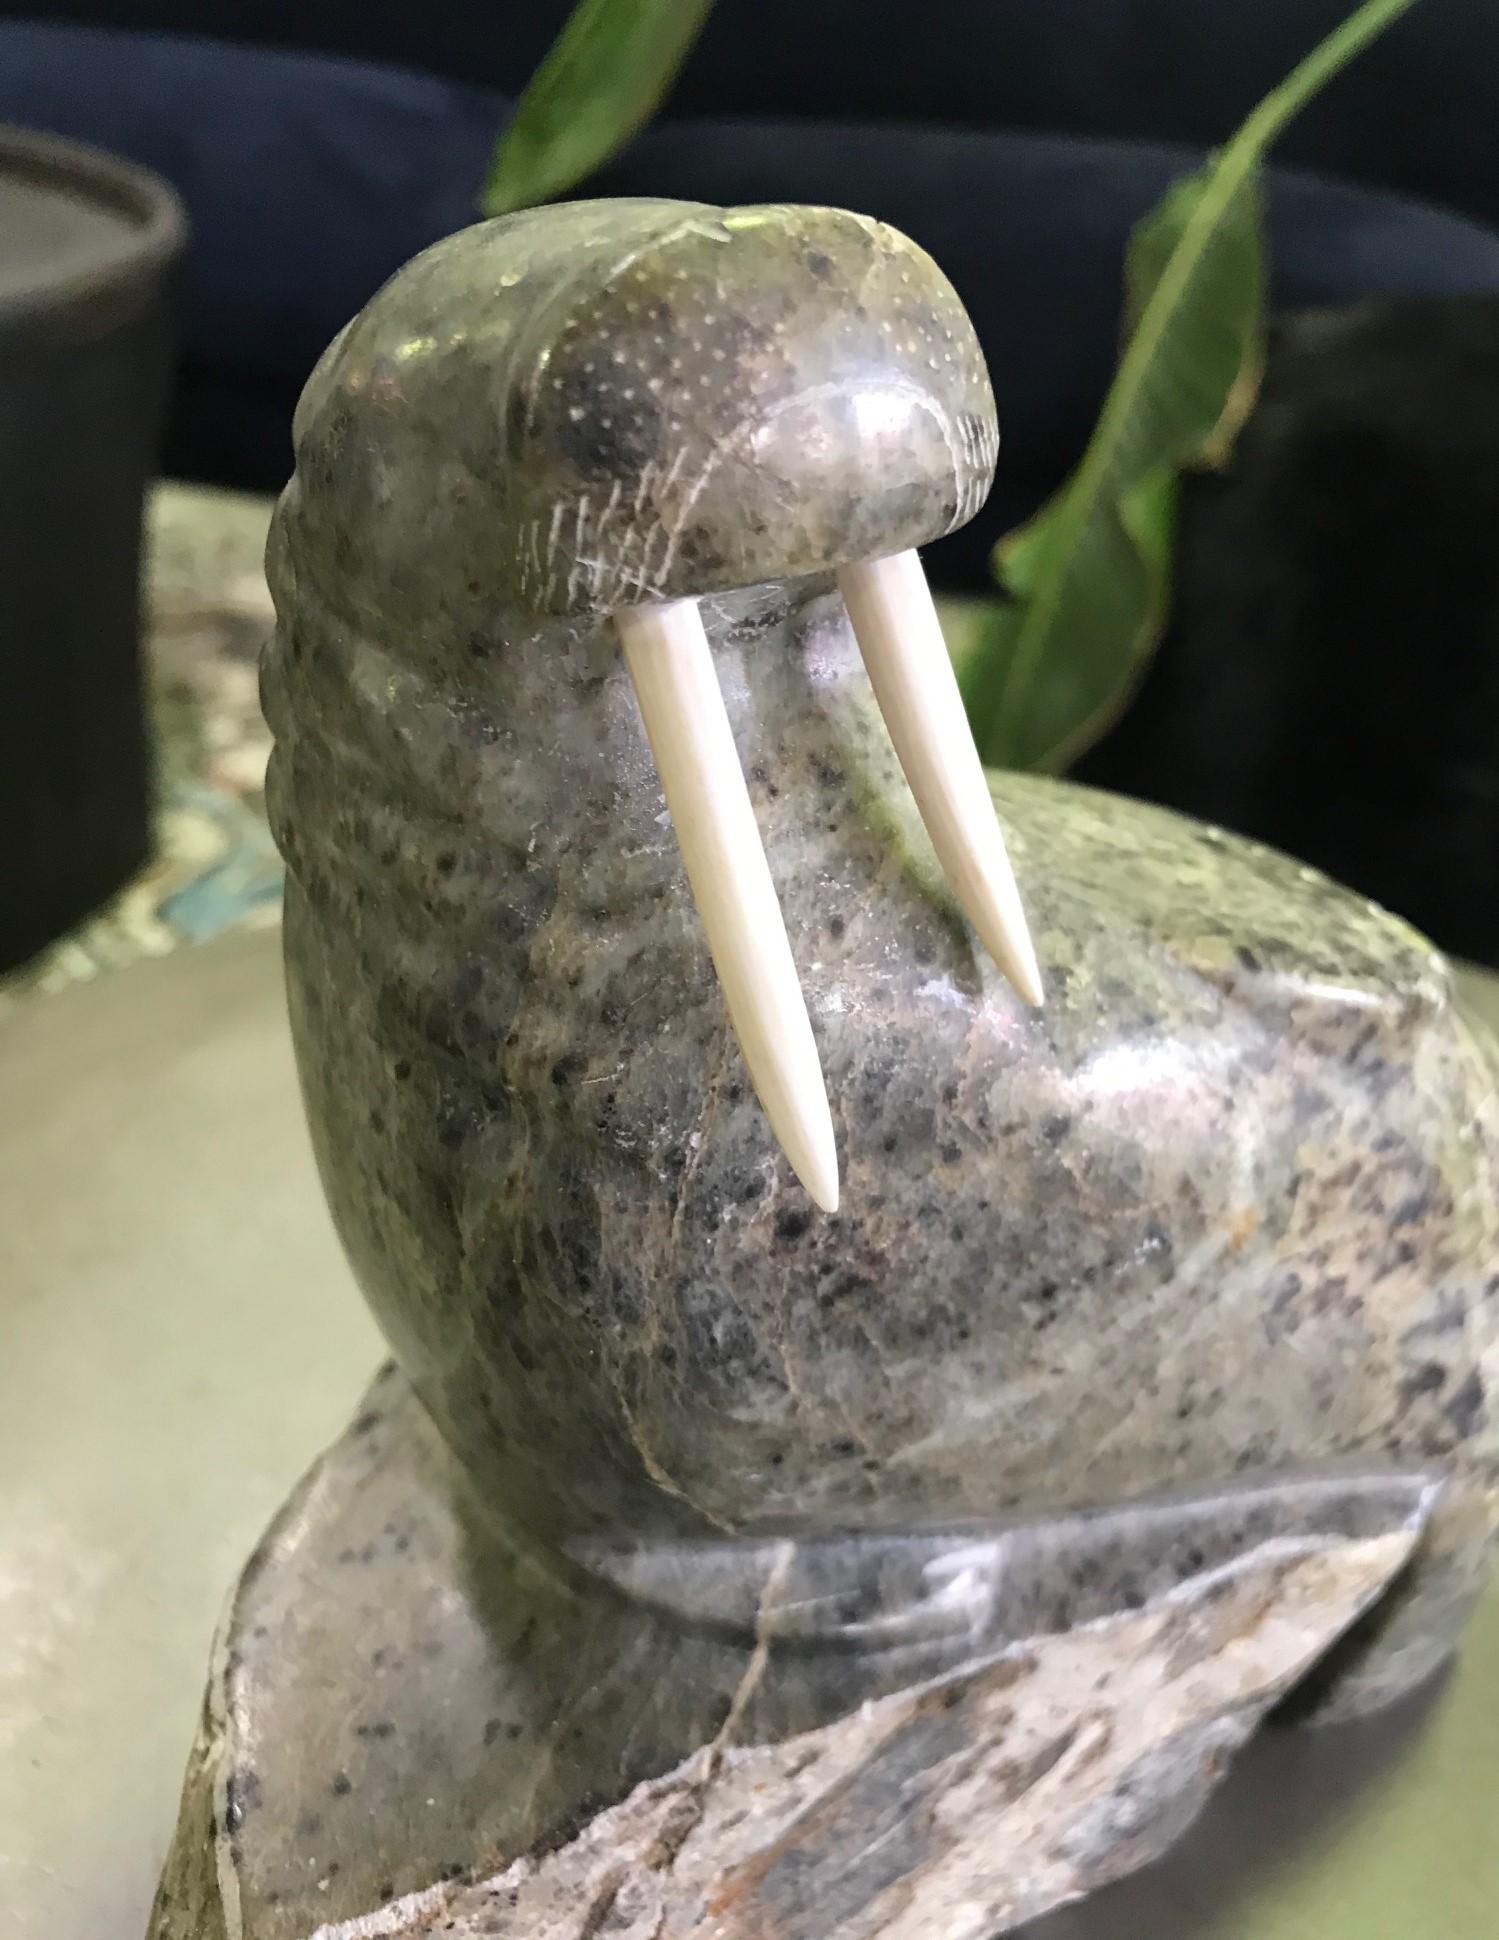 Canadian Inuit Native American Eskimo Stone Carved Walrus Sculpture with Tusks